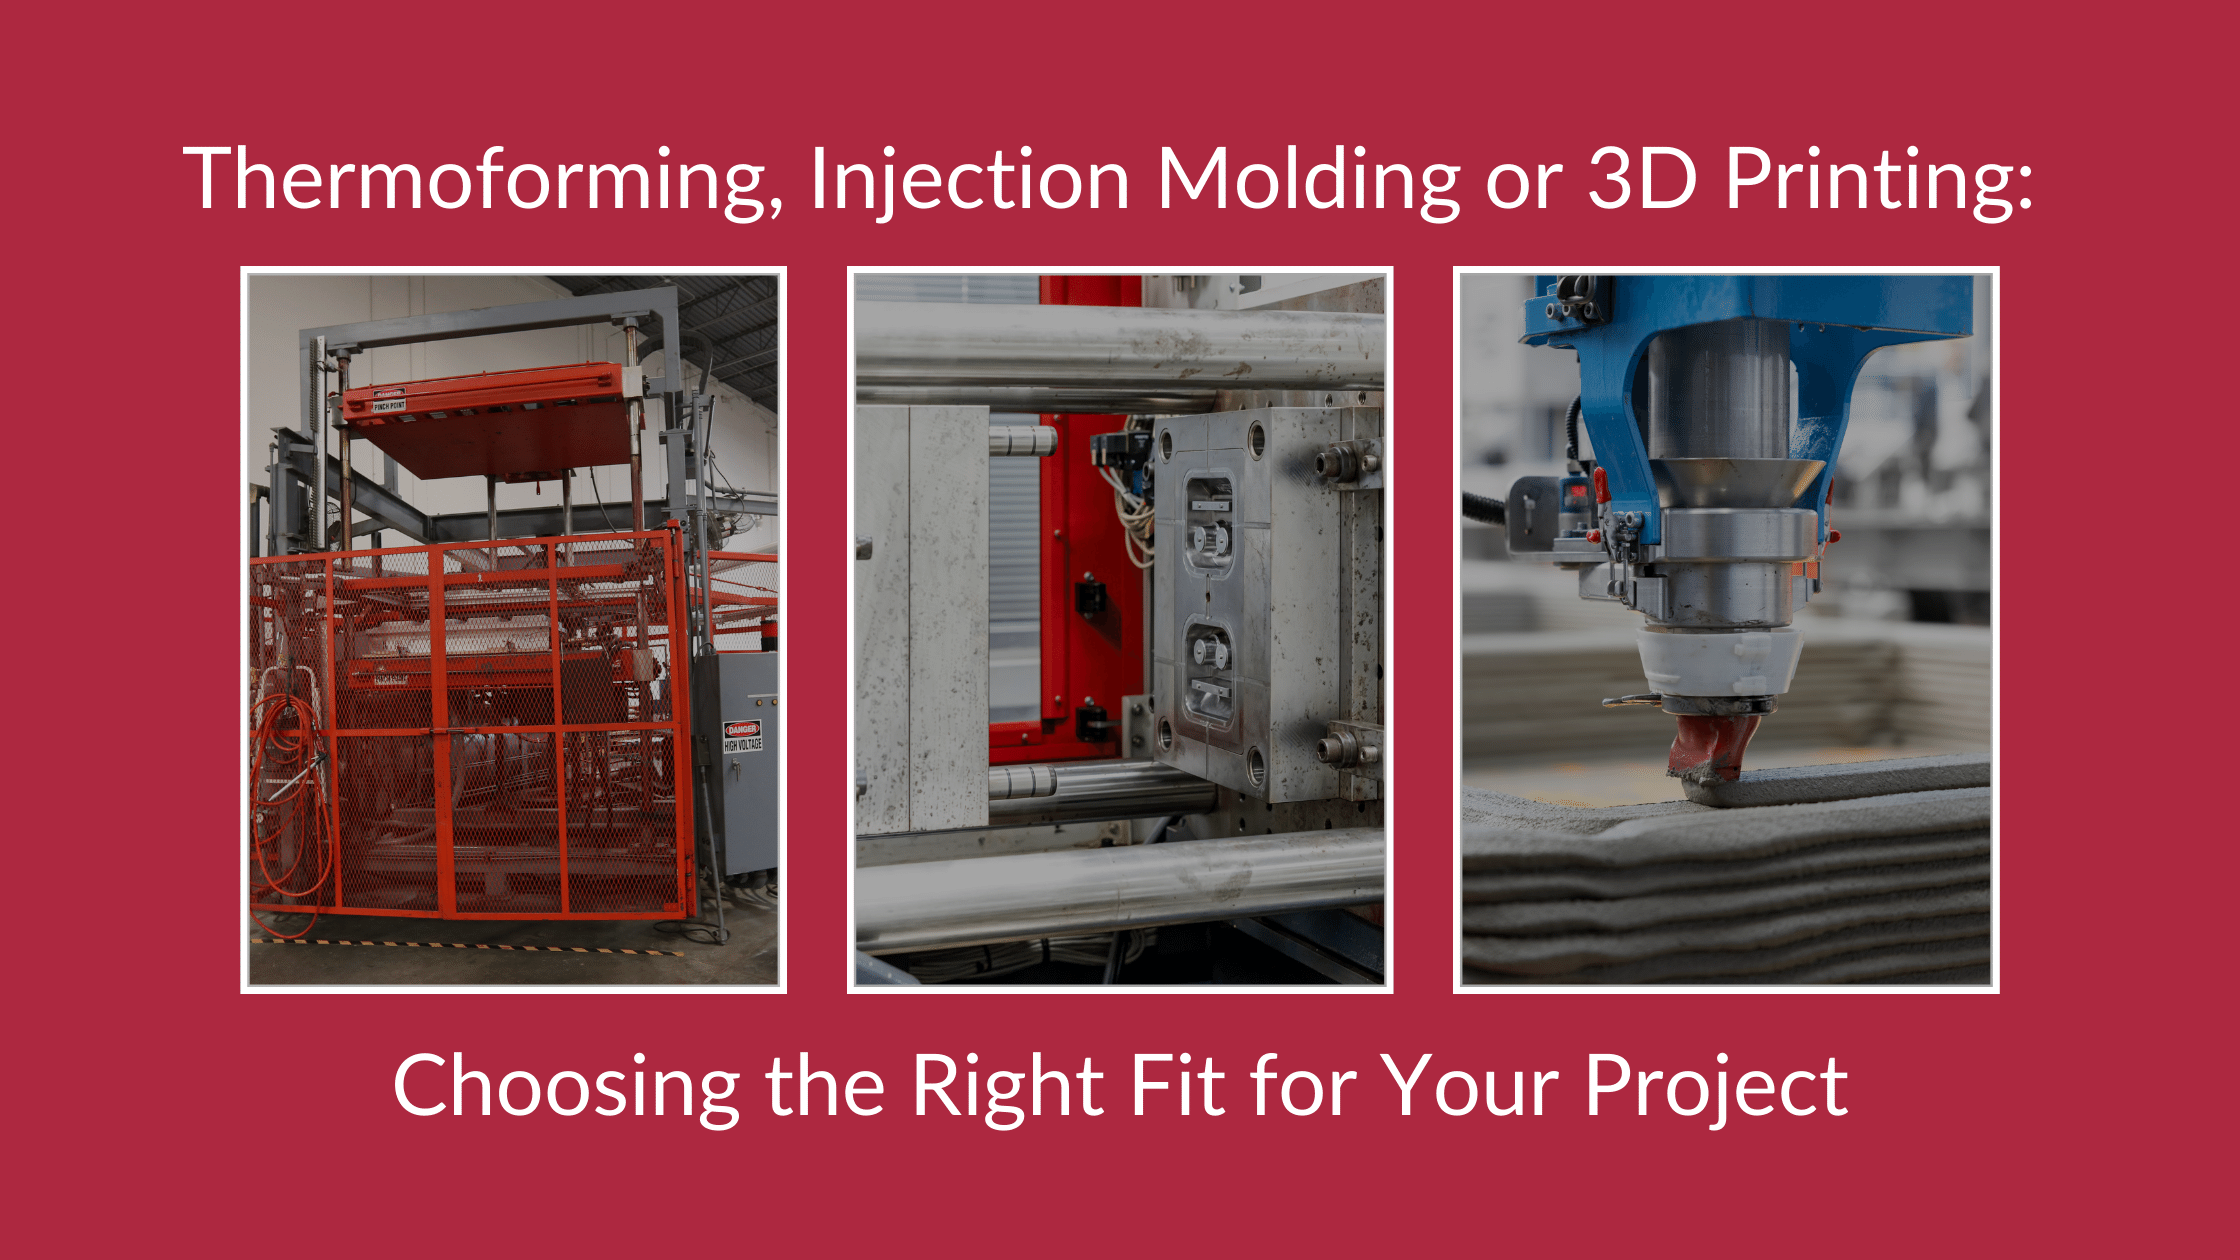 Thermoforming, Injection Molding or 3D Printing